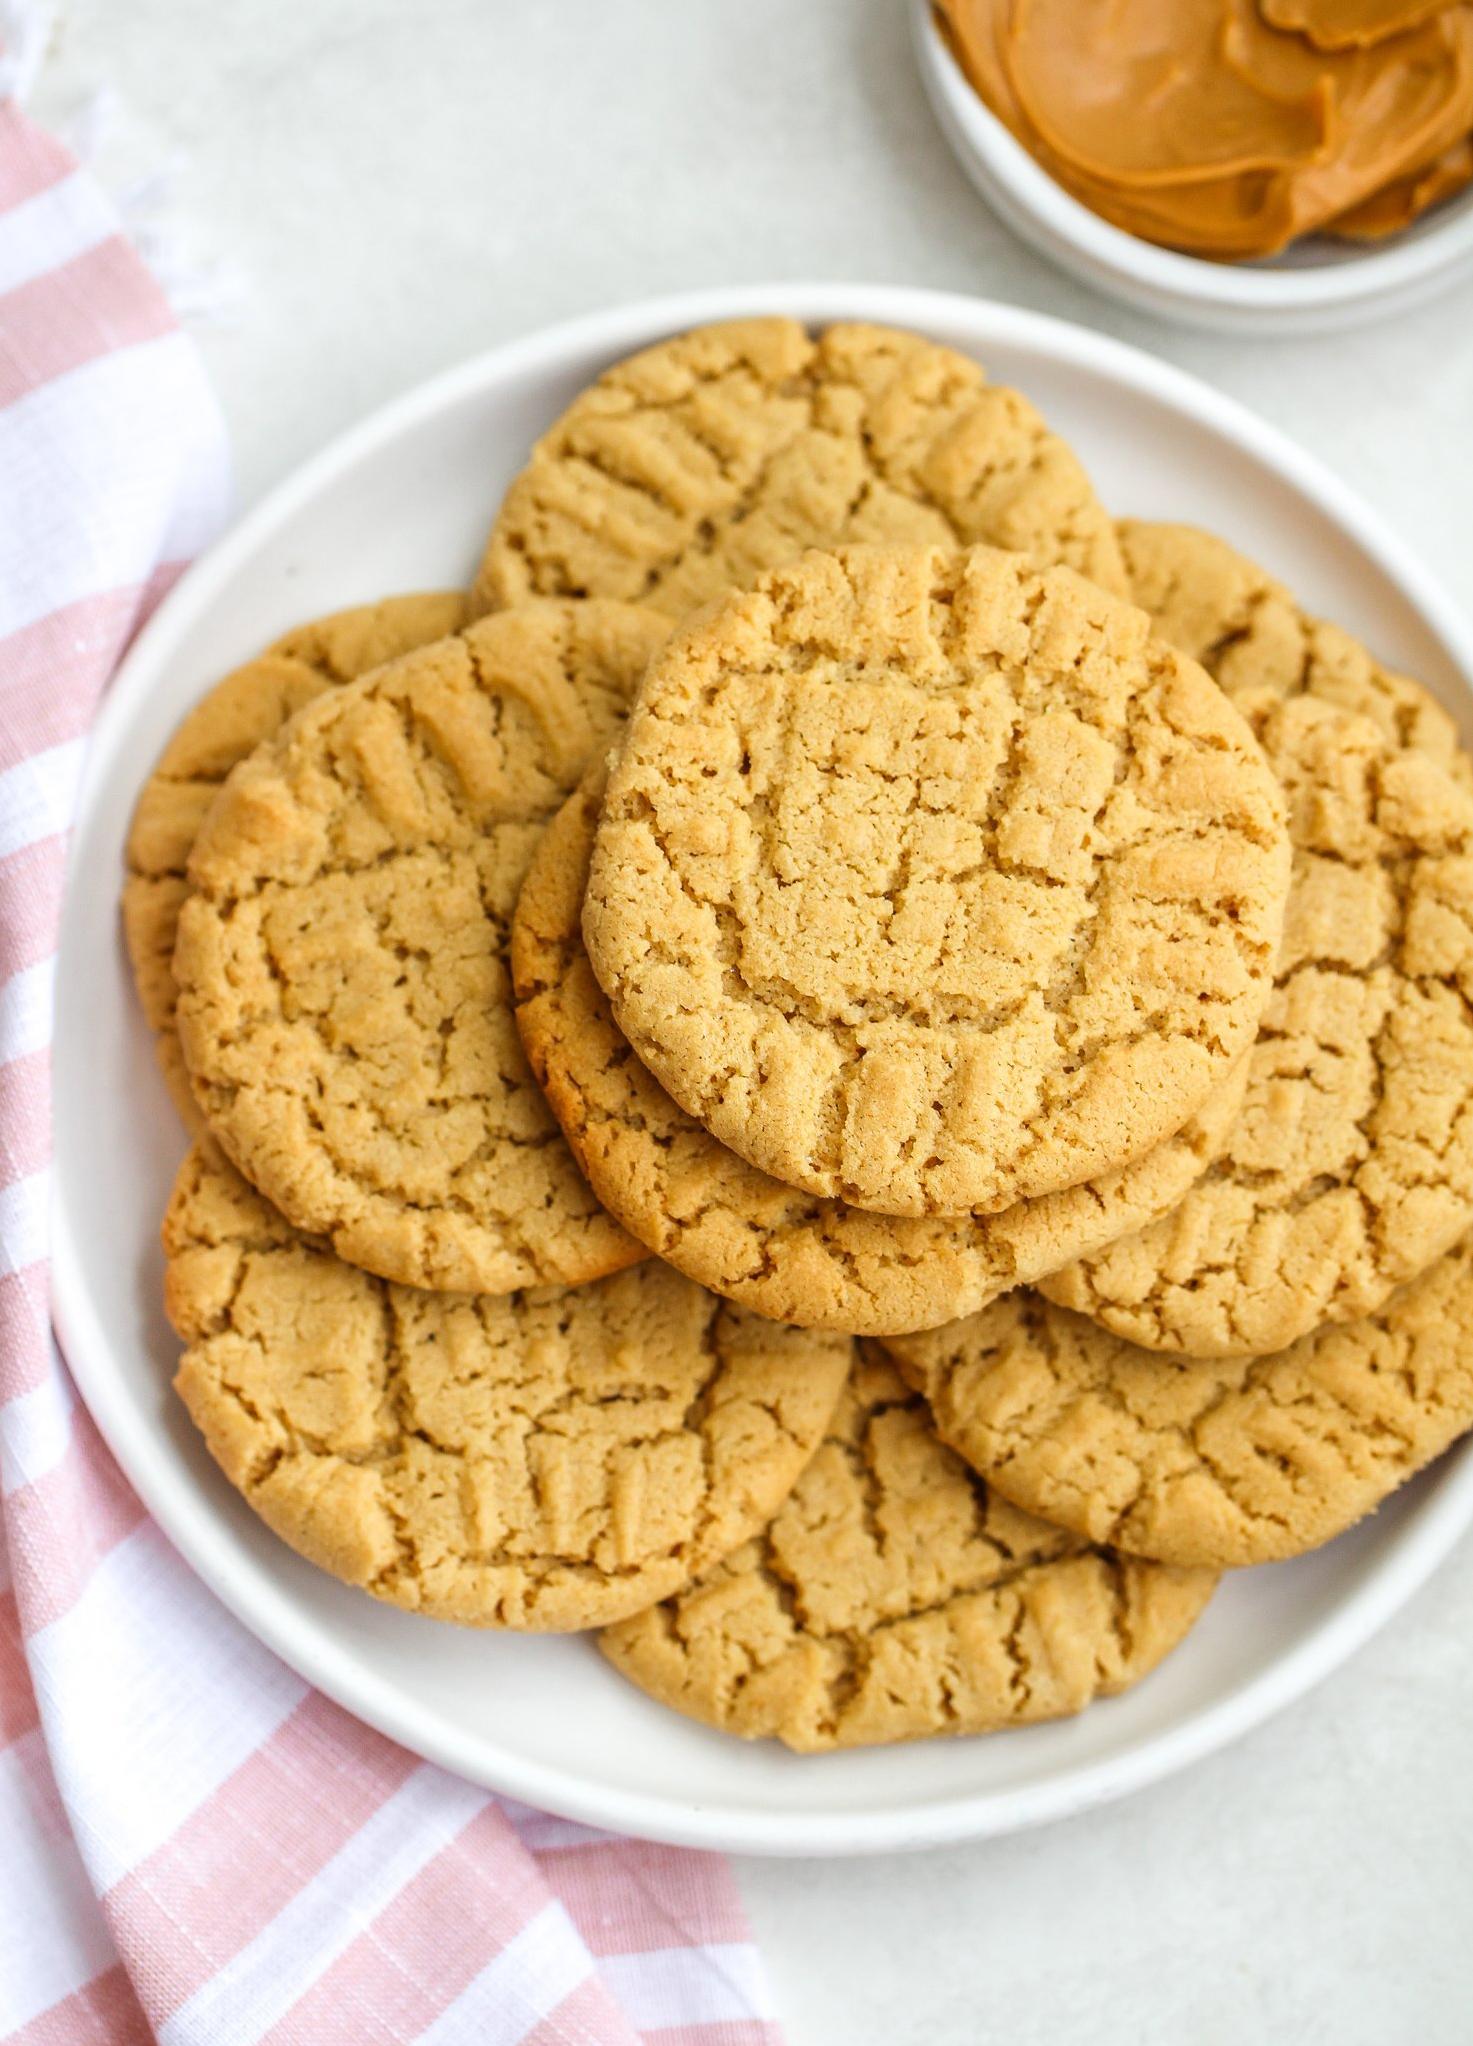  Crunchy on the outside, soft on the inside – these peanut butter cookies are gluten-free perfection!